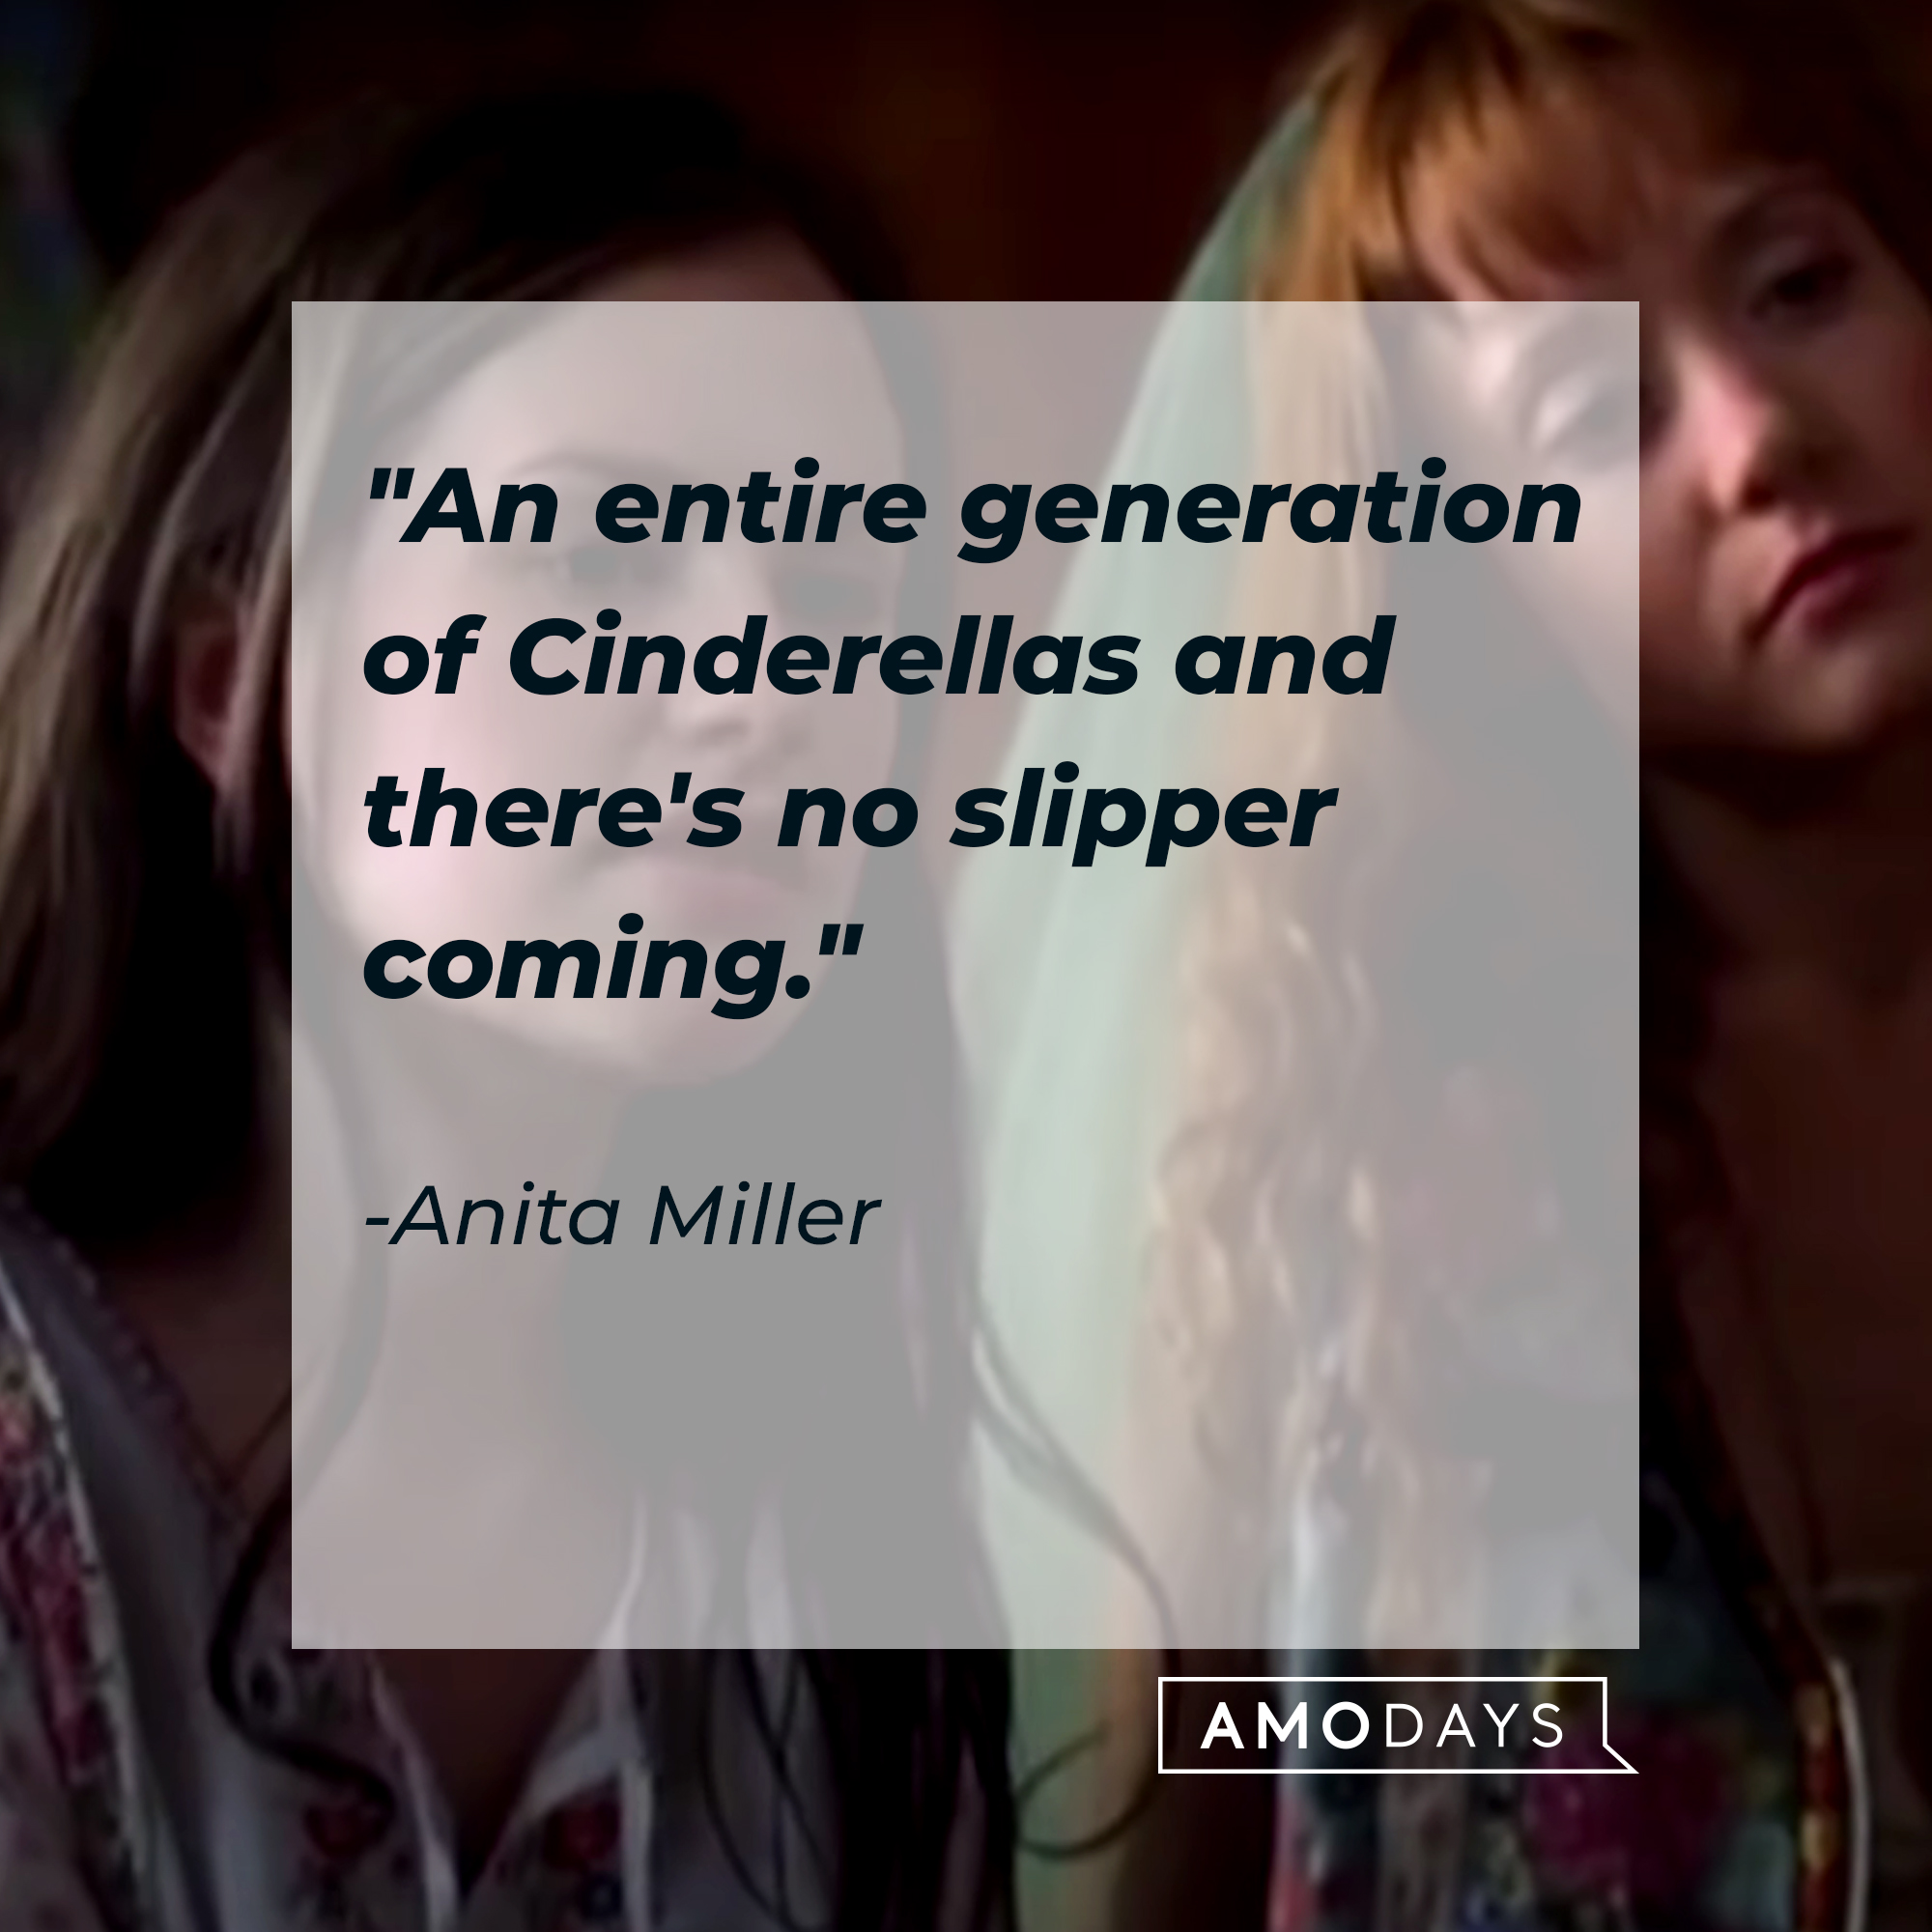 Anita Miller's quote: "An entire generation of Cinderellas and there's no slipper coming." | Source: Facebook/AlmostFamousTheMovie